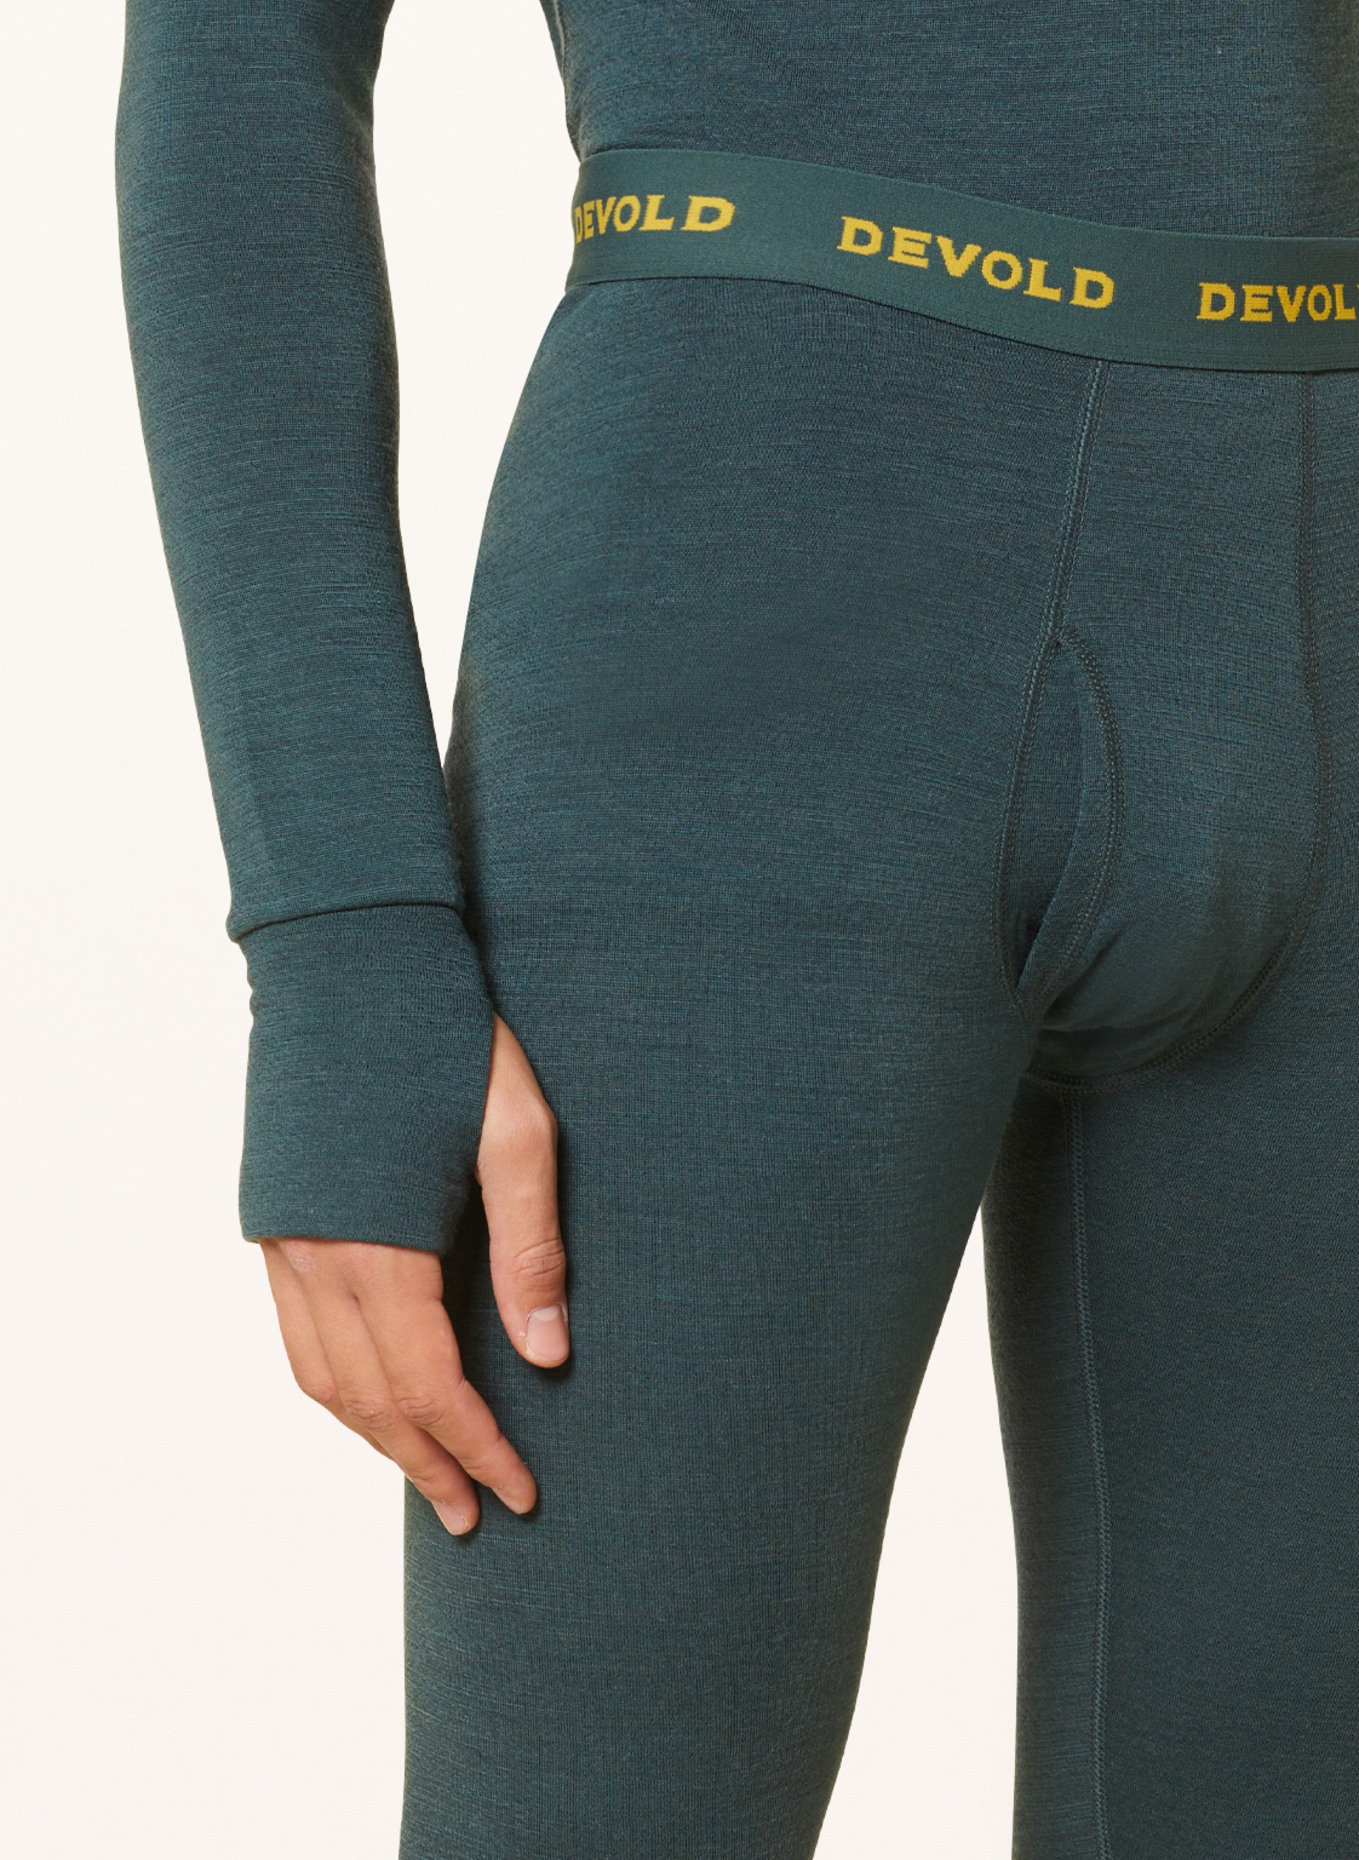 DEVOLD Functional baselayer trousers EXPEDITION made of merino wool, Color: DARK GREEN (Image 5)